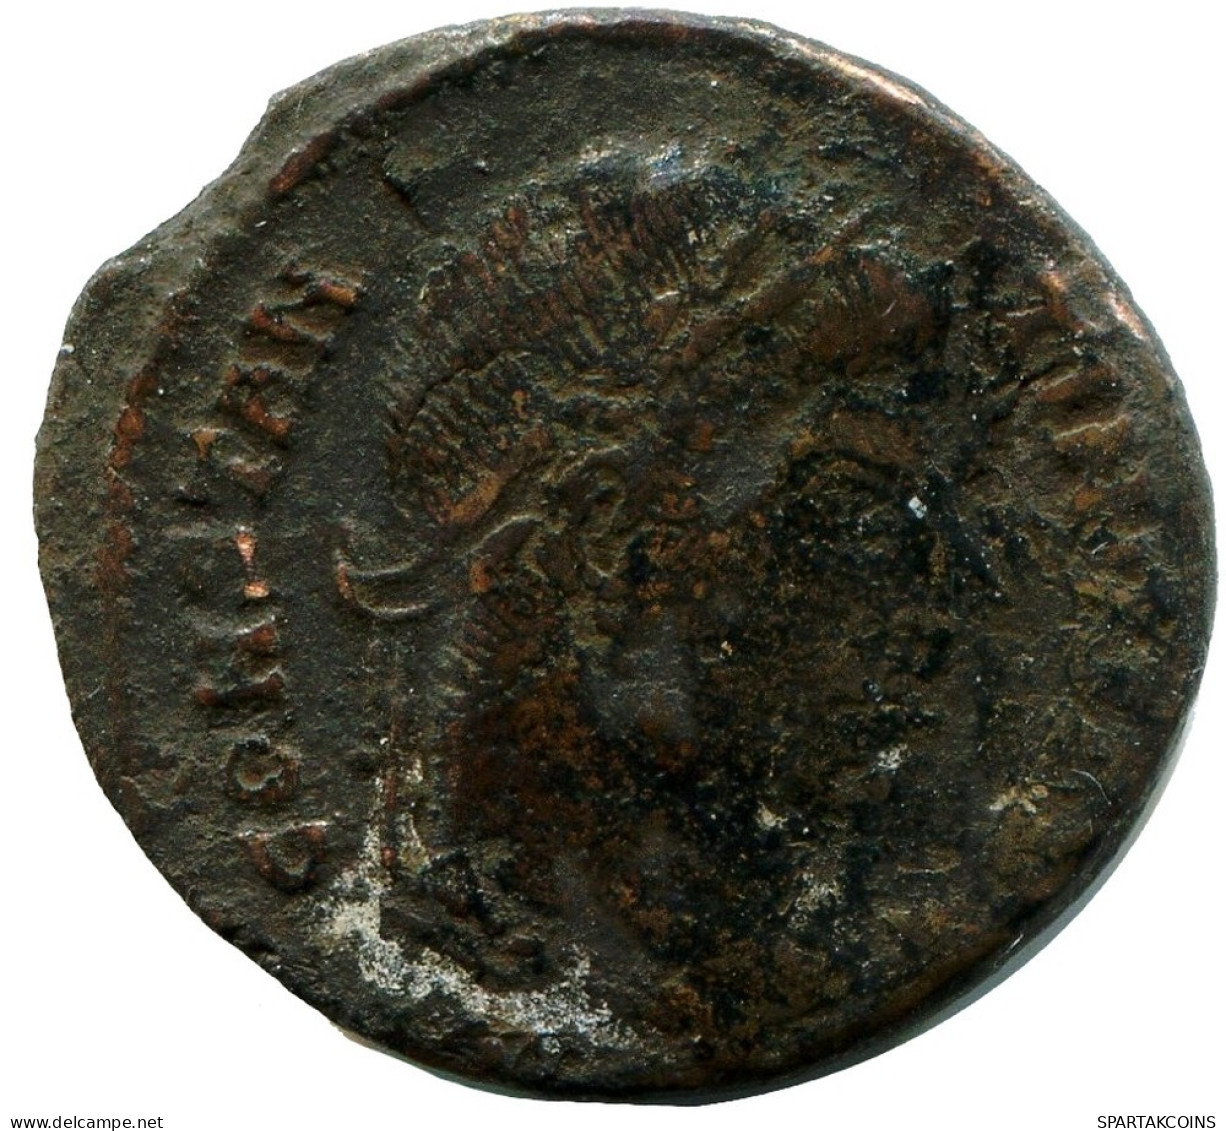 CONSTANTINE I MINTED IN ROME ITALY FOUND IN IHNASYAH HOARD EGYPT #ANC11156.14.E.A - The Christian Empire (307 AD To 363 AD)